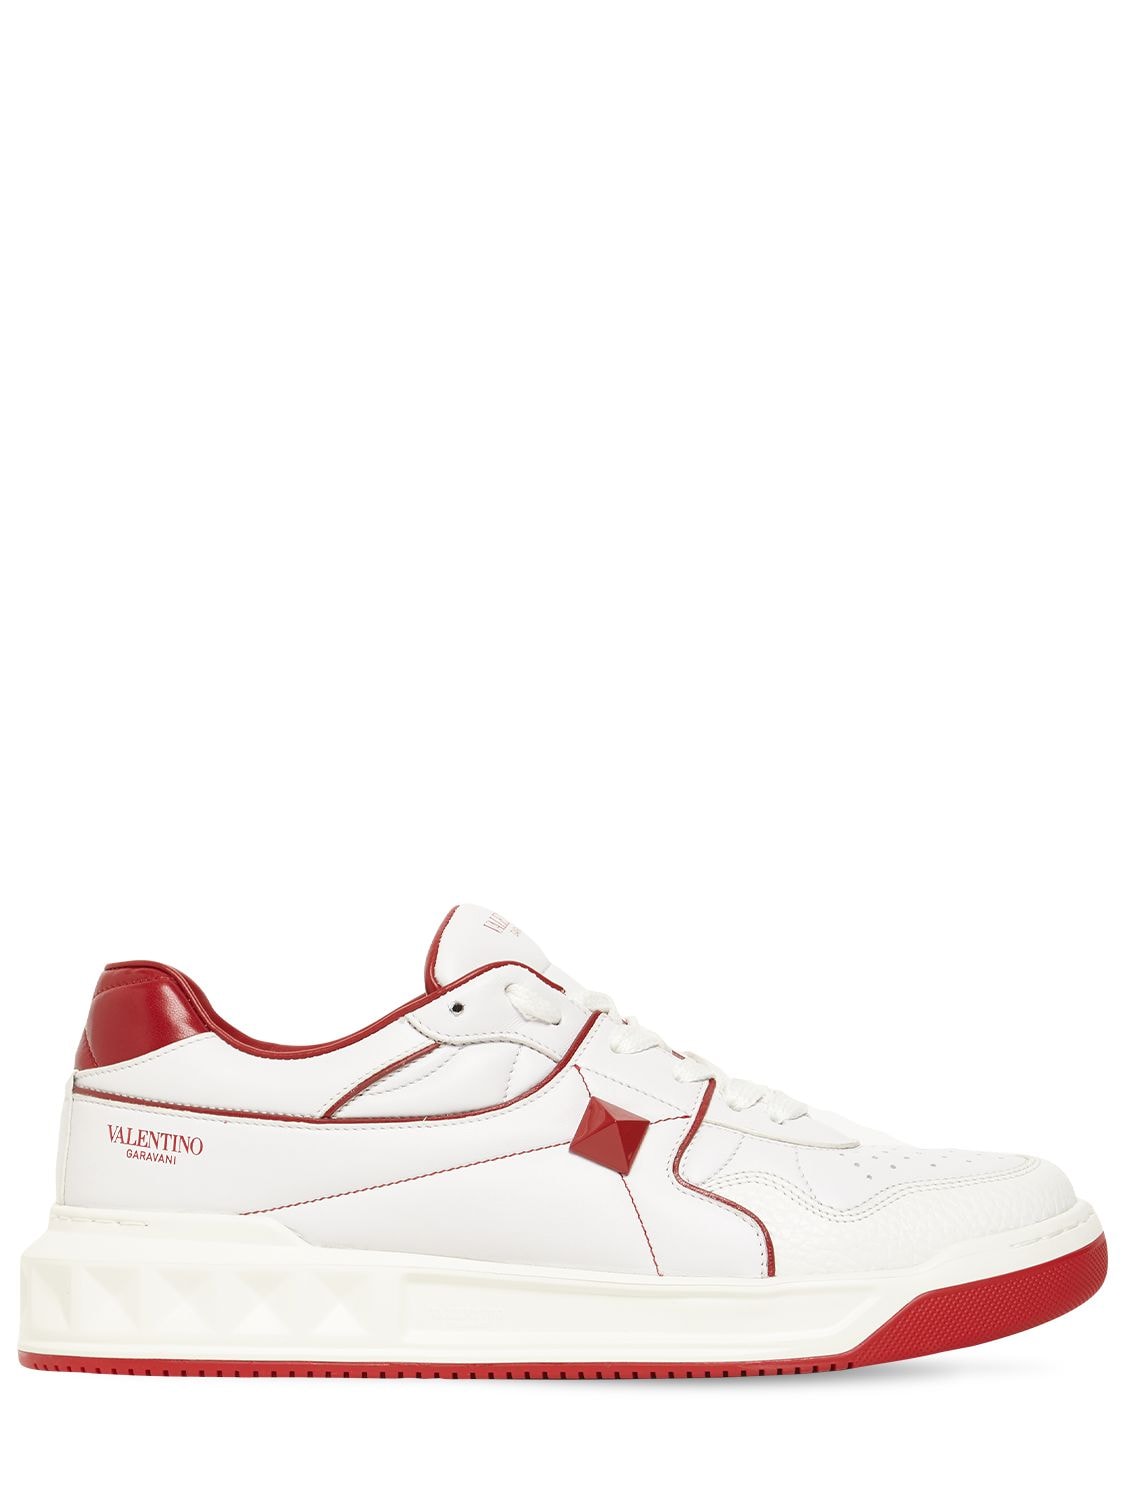 Valentino Garavani Stud Leather With Contrasting In White And Red | ModeSens